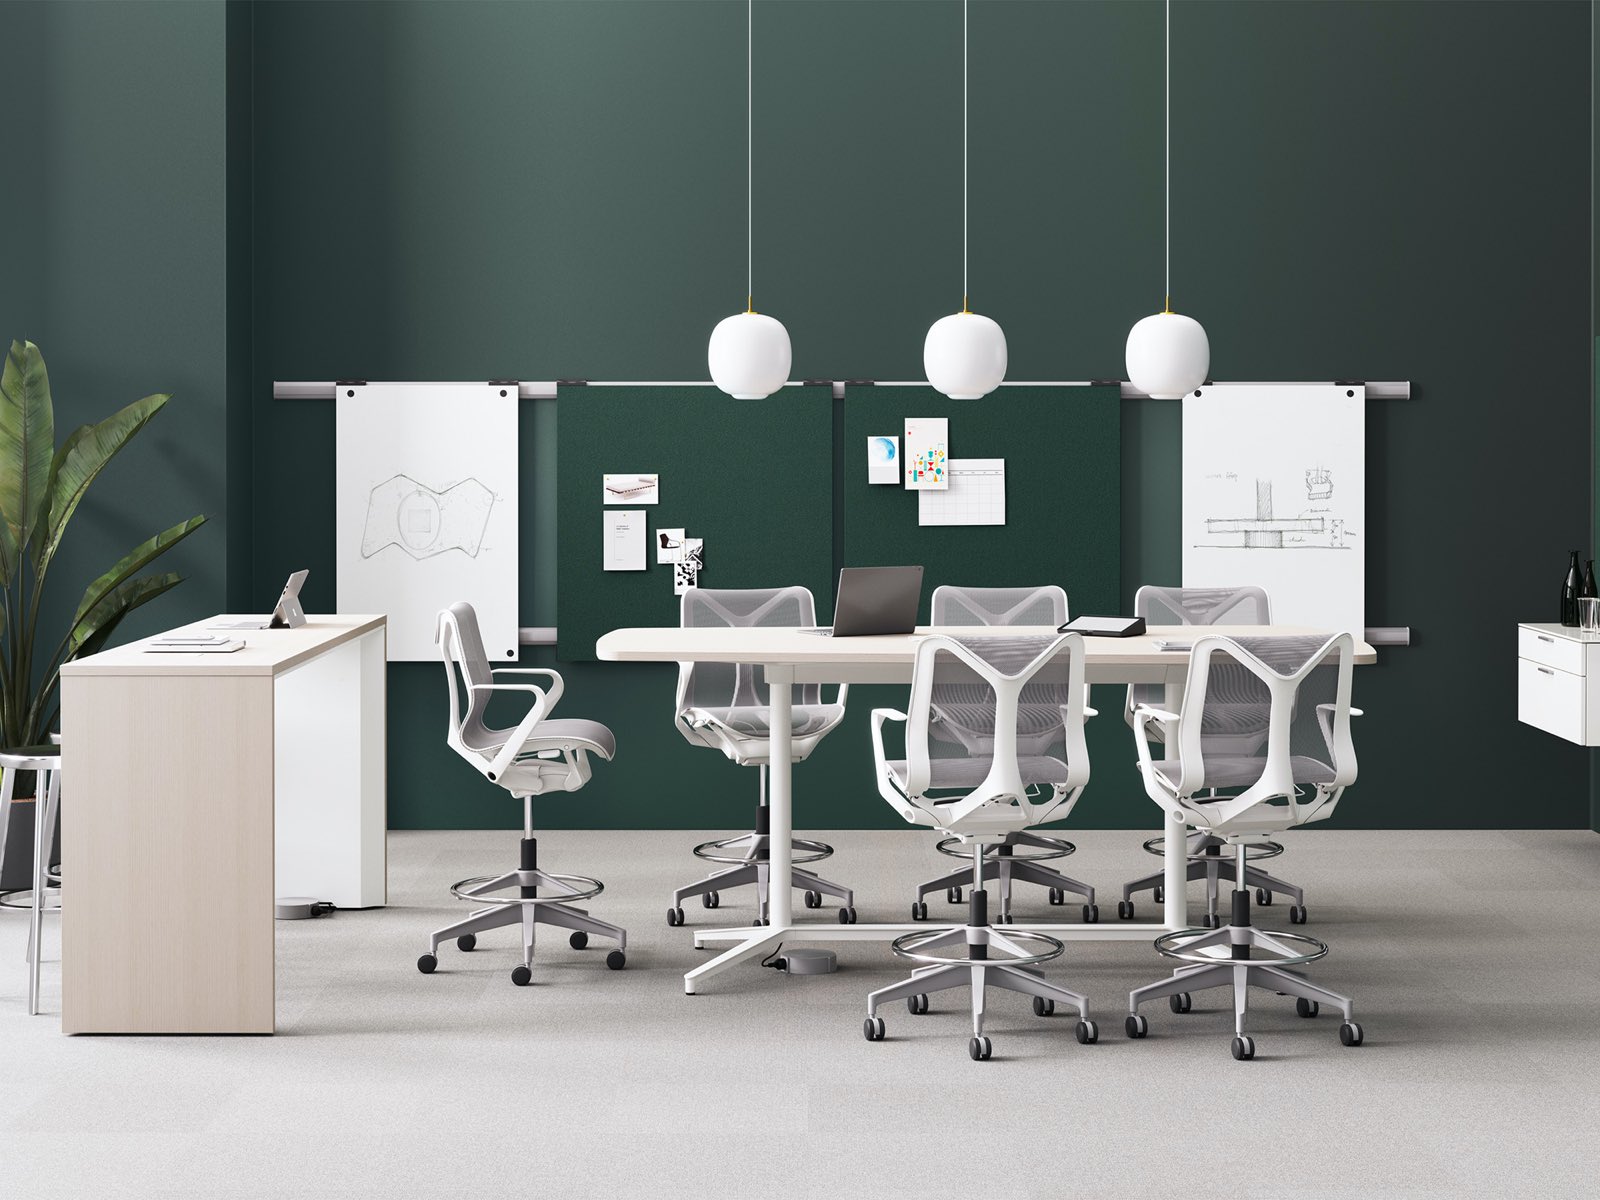 A rendering of Headway communal and Y Base table in a work room with Cosm Stools, Logic Reach providing power, and Exclave Collaborative Furniture.